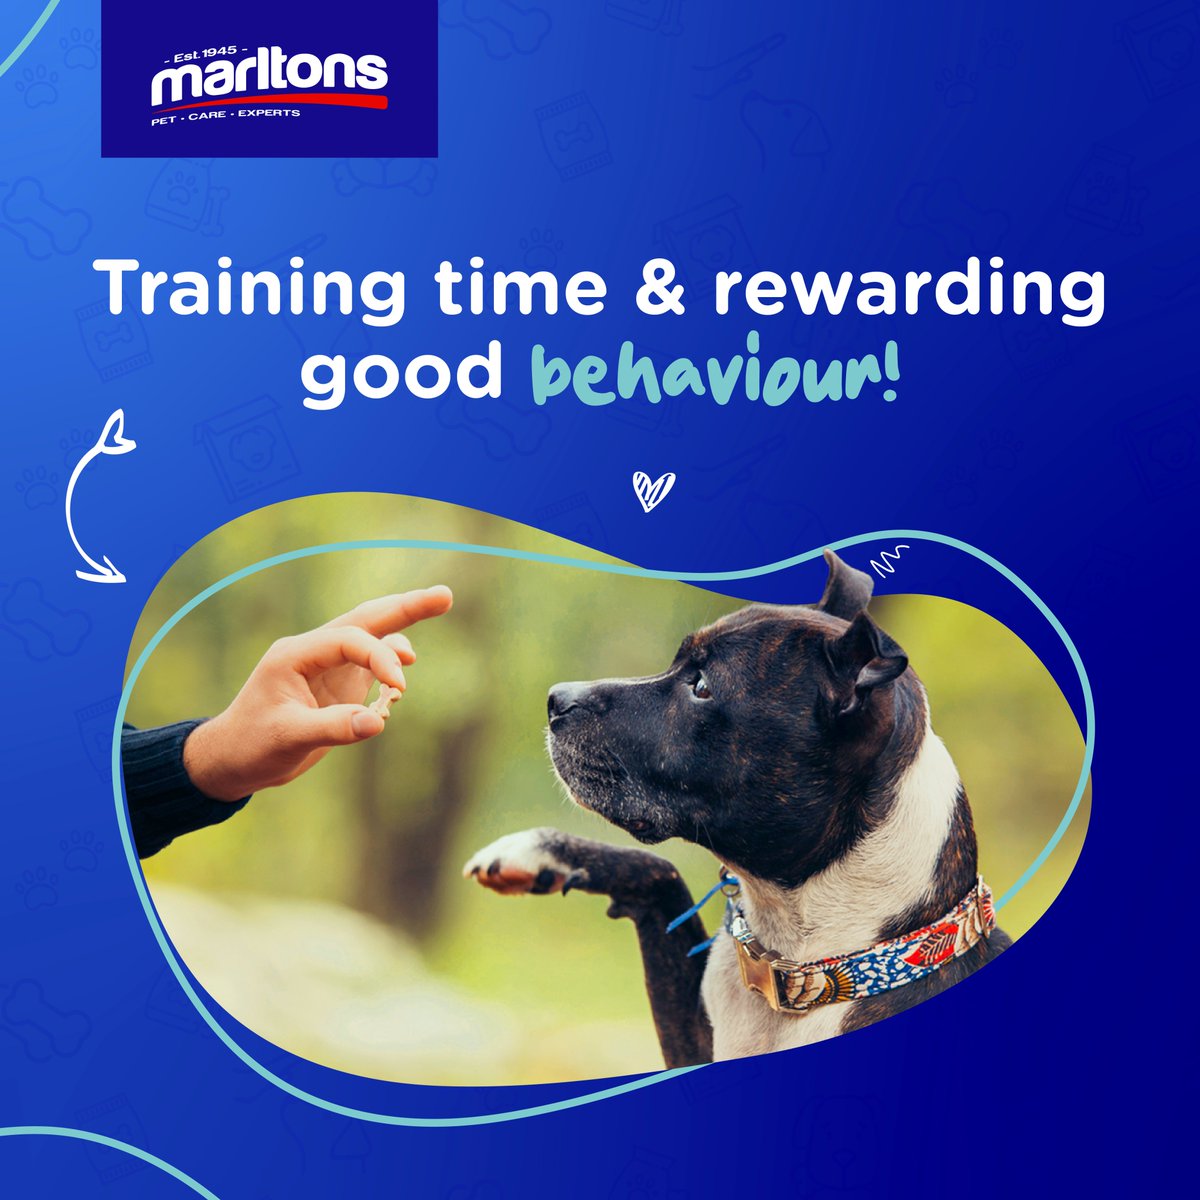 Does your dog get the zoomies after a walk? Need a healthy pick-me-up during playtime? Training session leaving them a little peckish? Healthy snacks are the answer! 🐶💖

Swipe through to see all the different snack occasions! 😊
#Marltons #PetCare #HealthyTreats #SnackTime